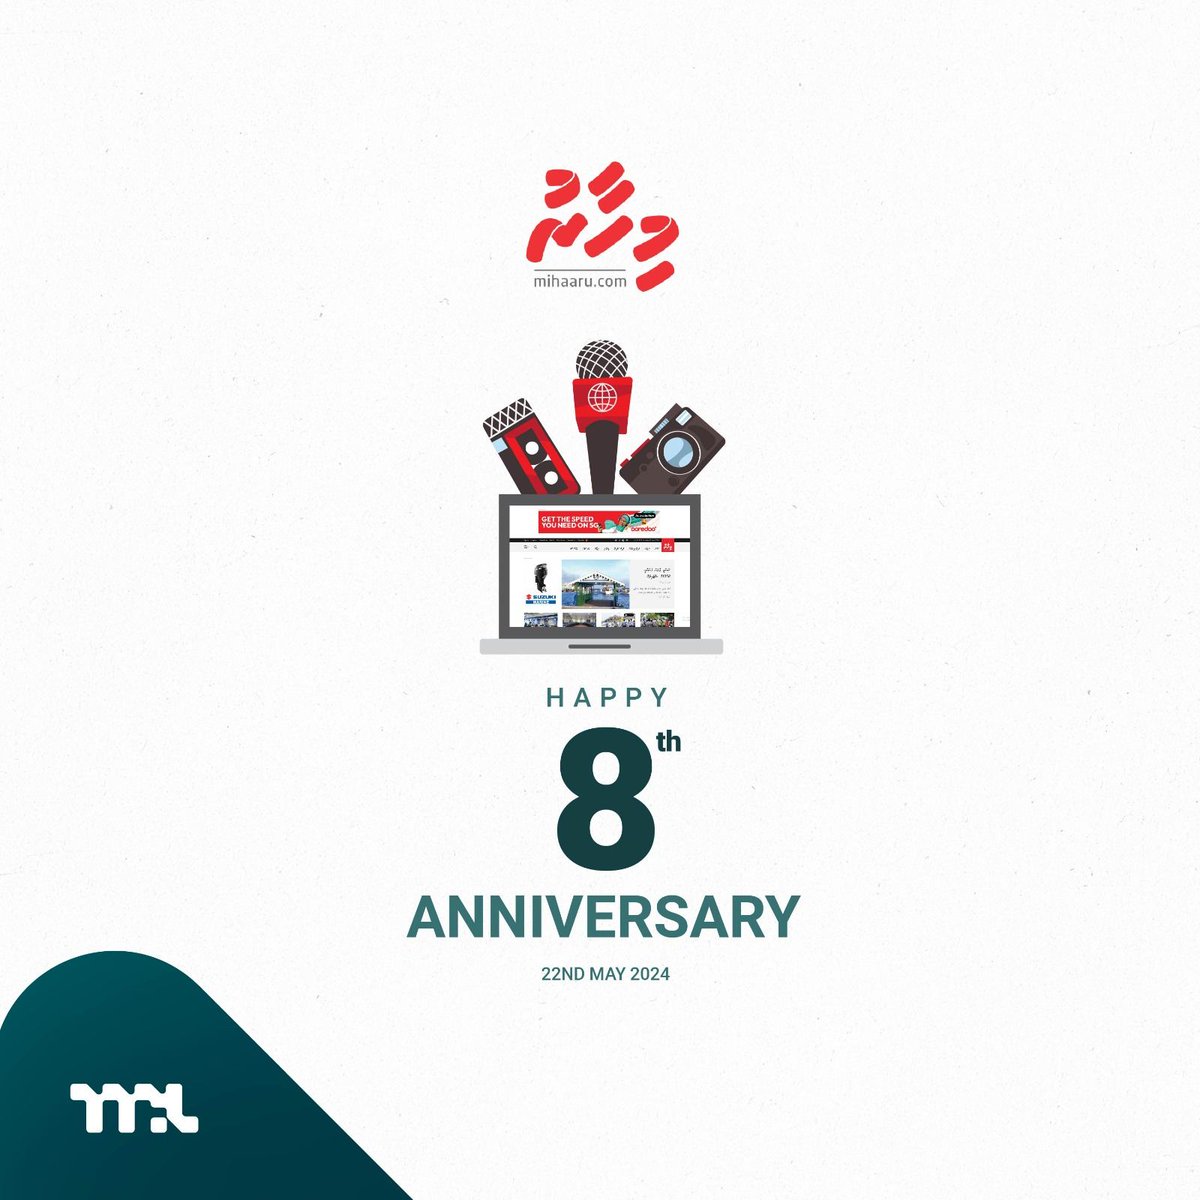 Best wishes to @Mihaarunews on their 8th anniversary.